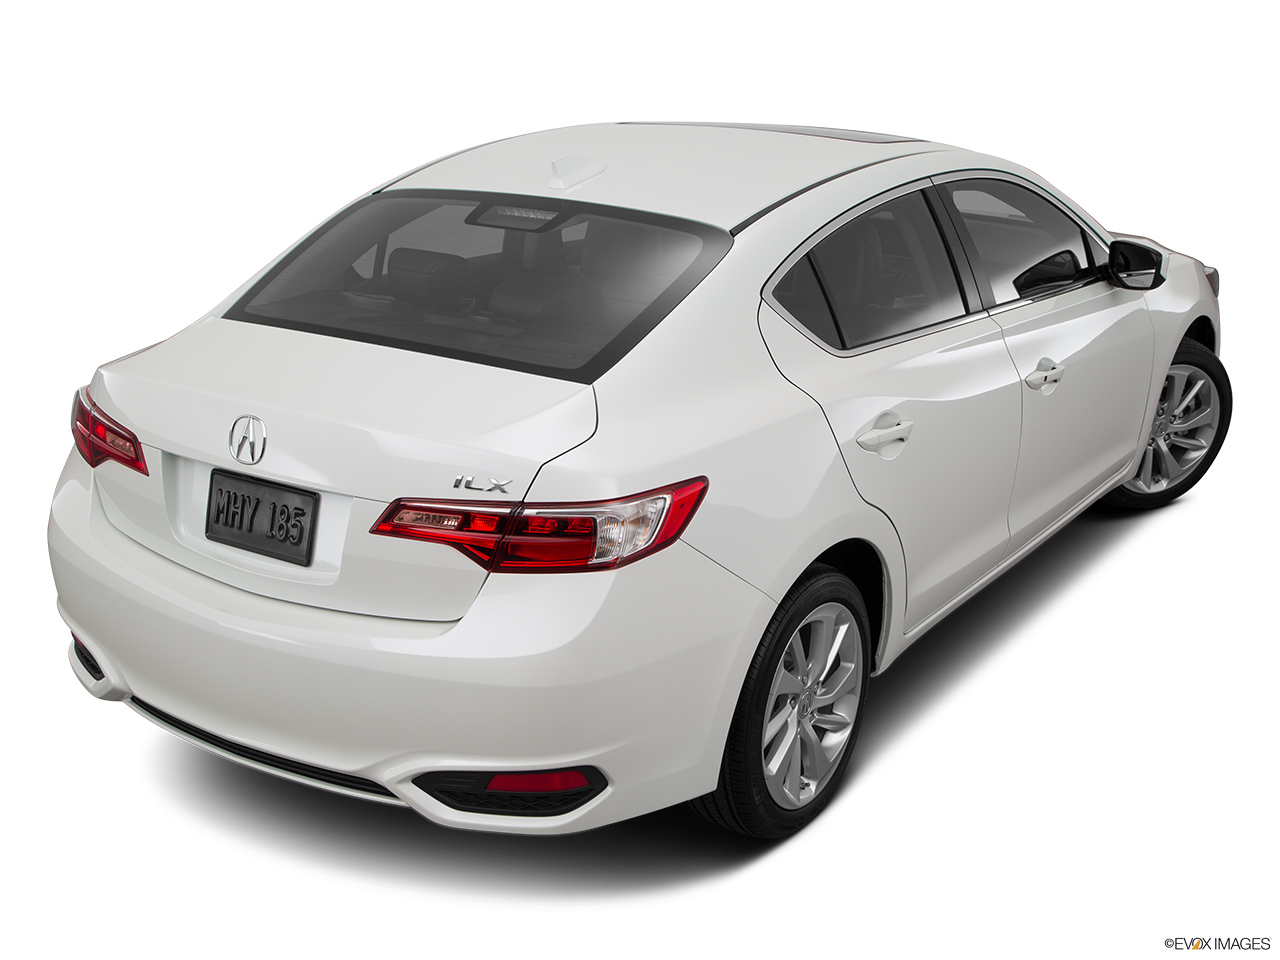 2016 Acura ILX AcuraWatch Plus Rear 3/4 angle view. 